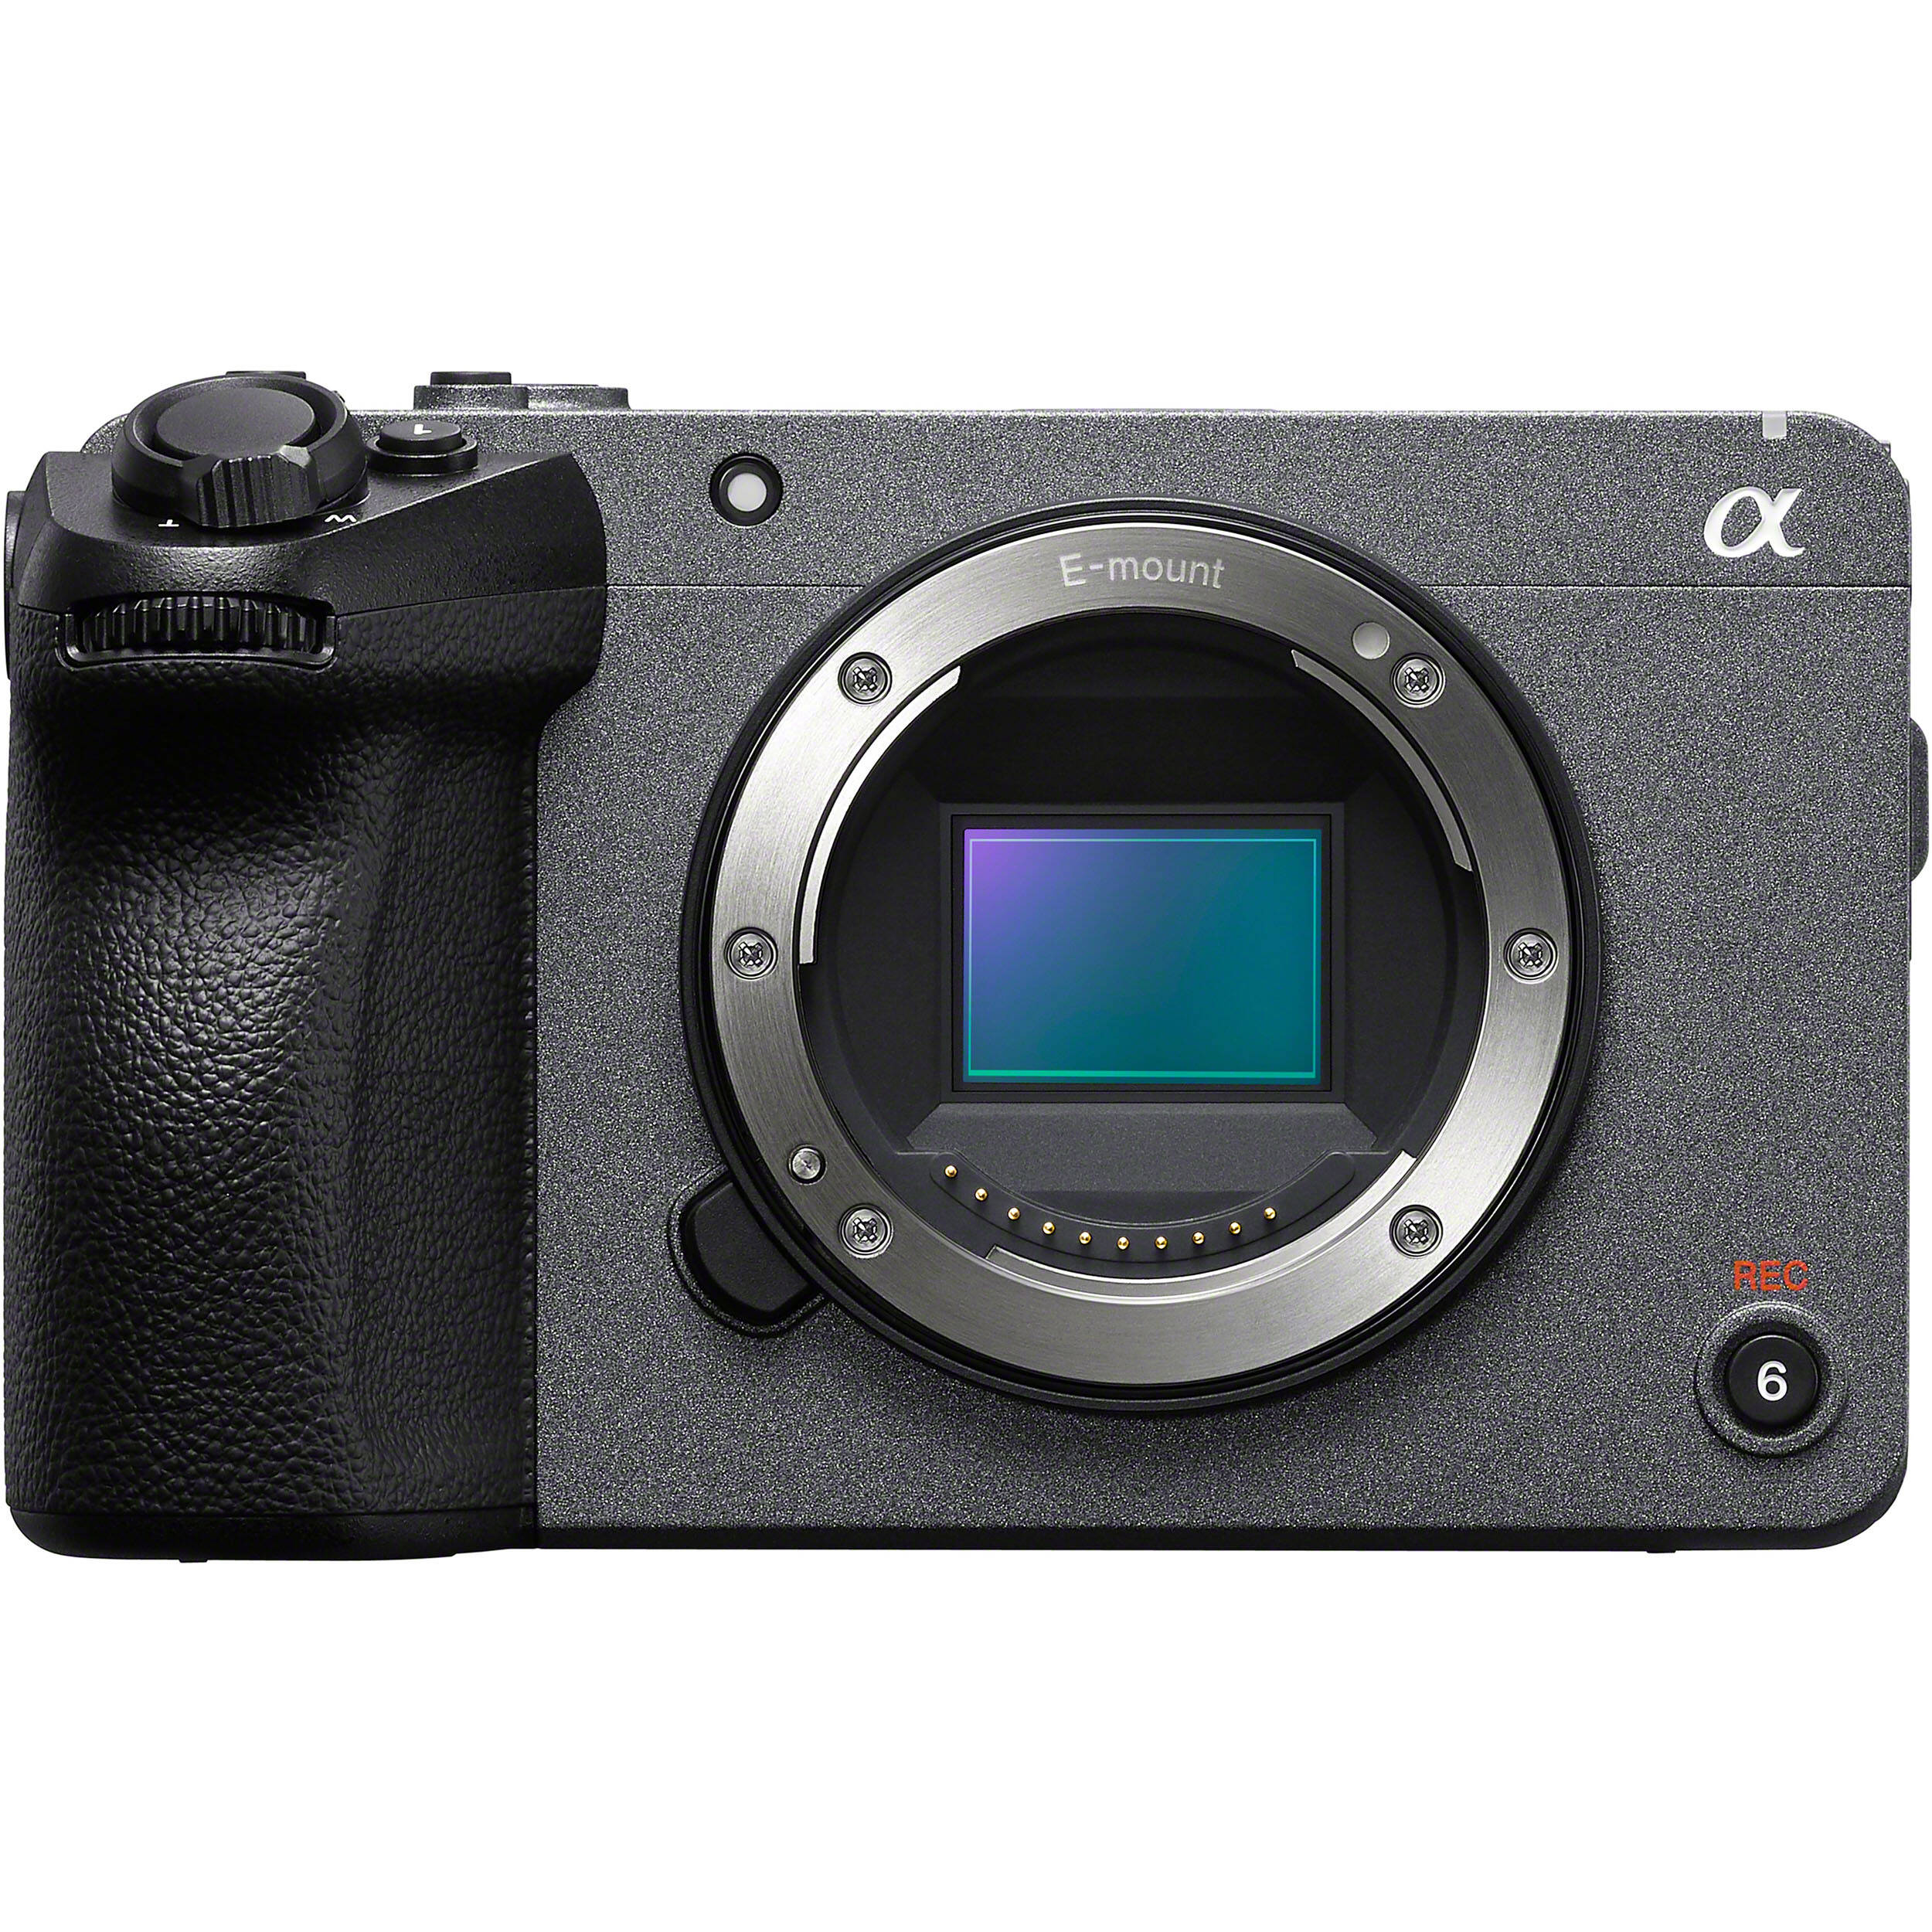 Sony a6700 APS-C mirrorless camera launched: 26MP, 4K 120fps, and USB 3.2  Gen 2